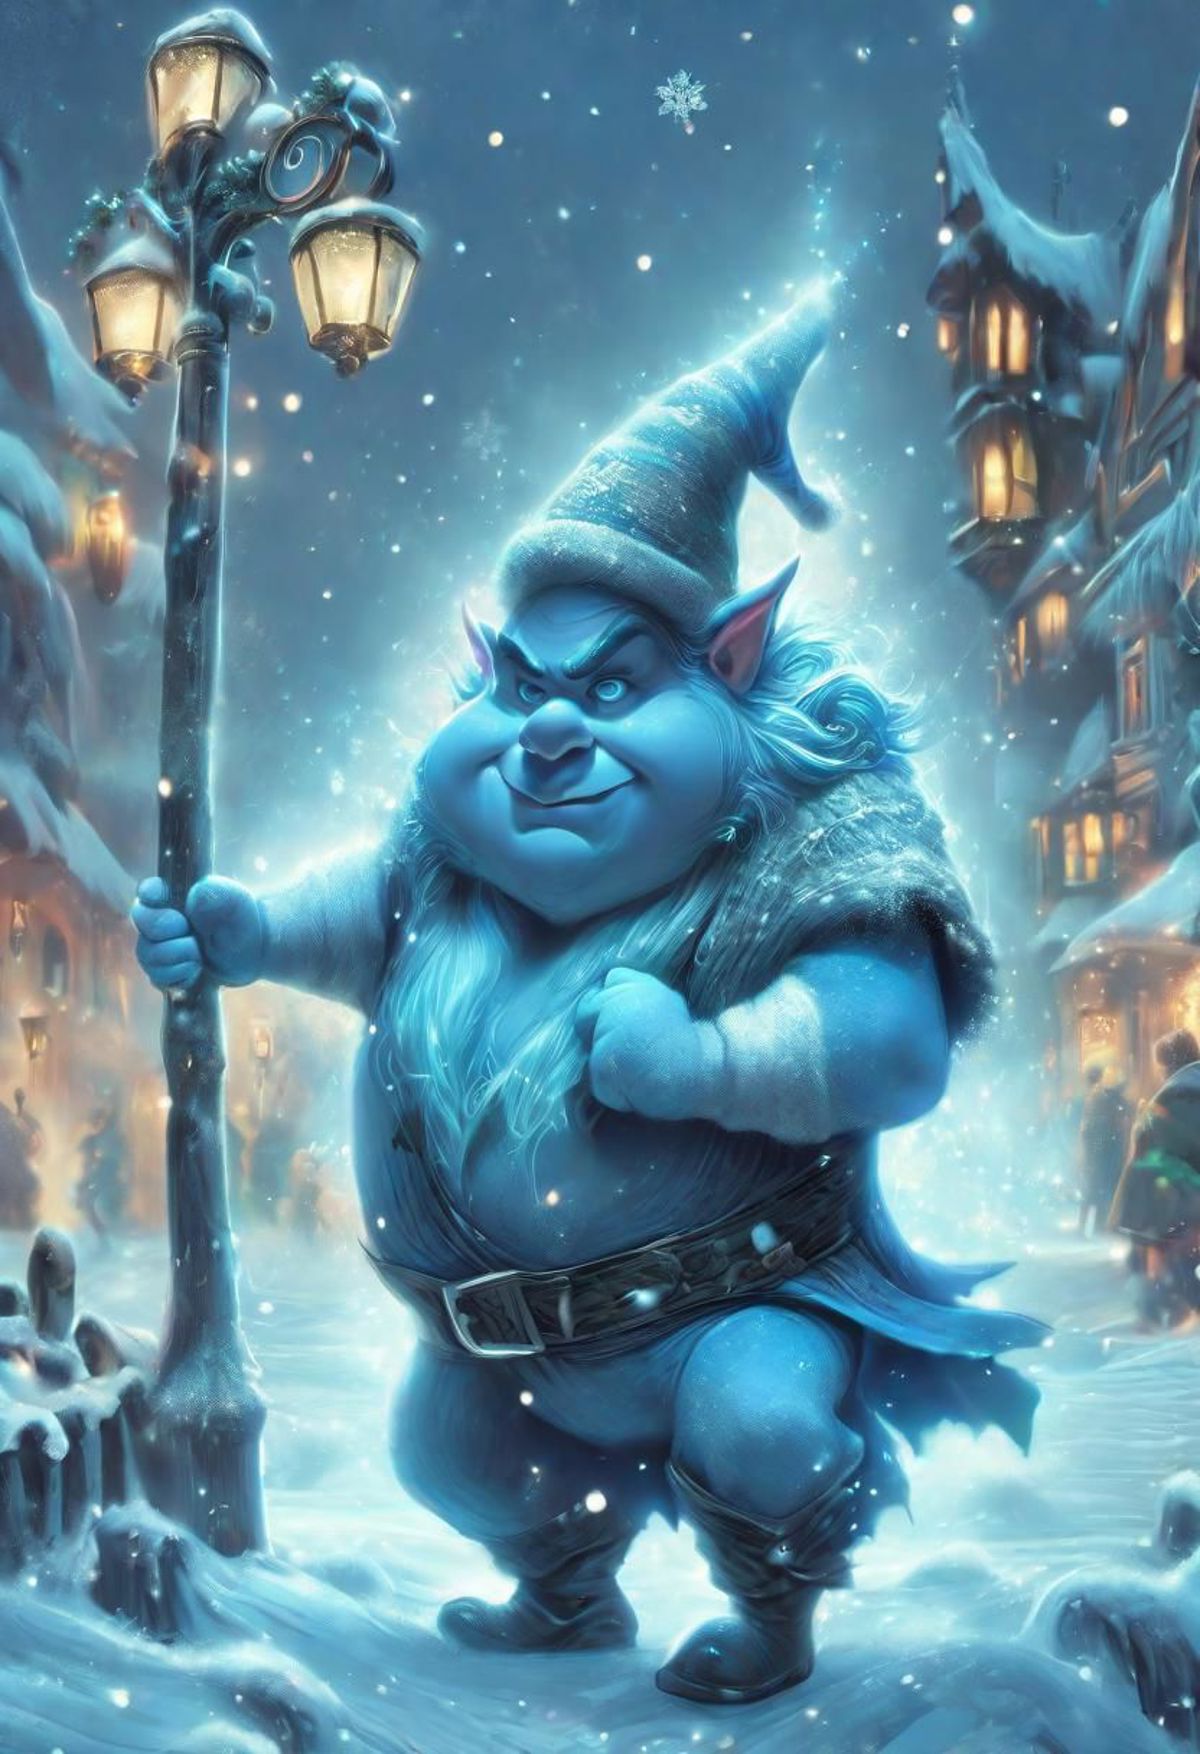 A blue, angry-looking character wearing a wizard hat and holding a lamp post.